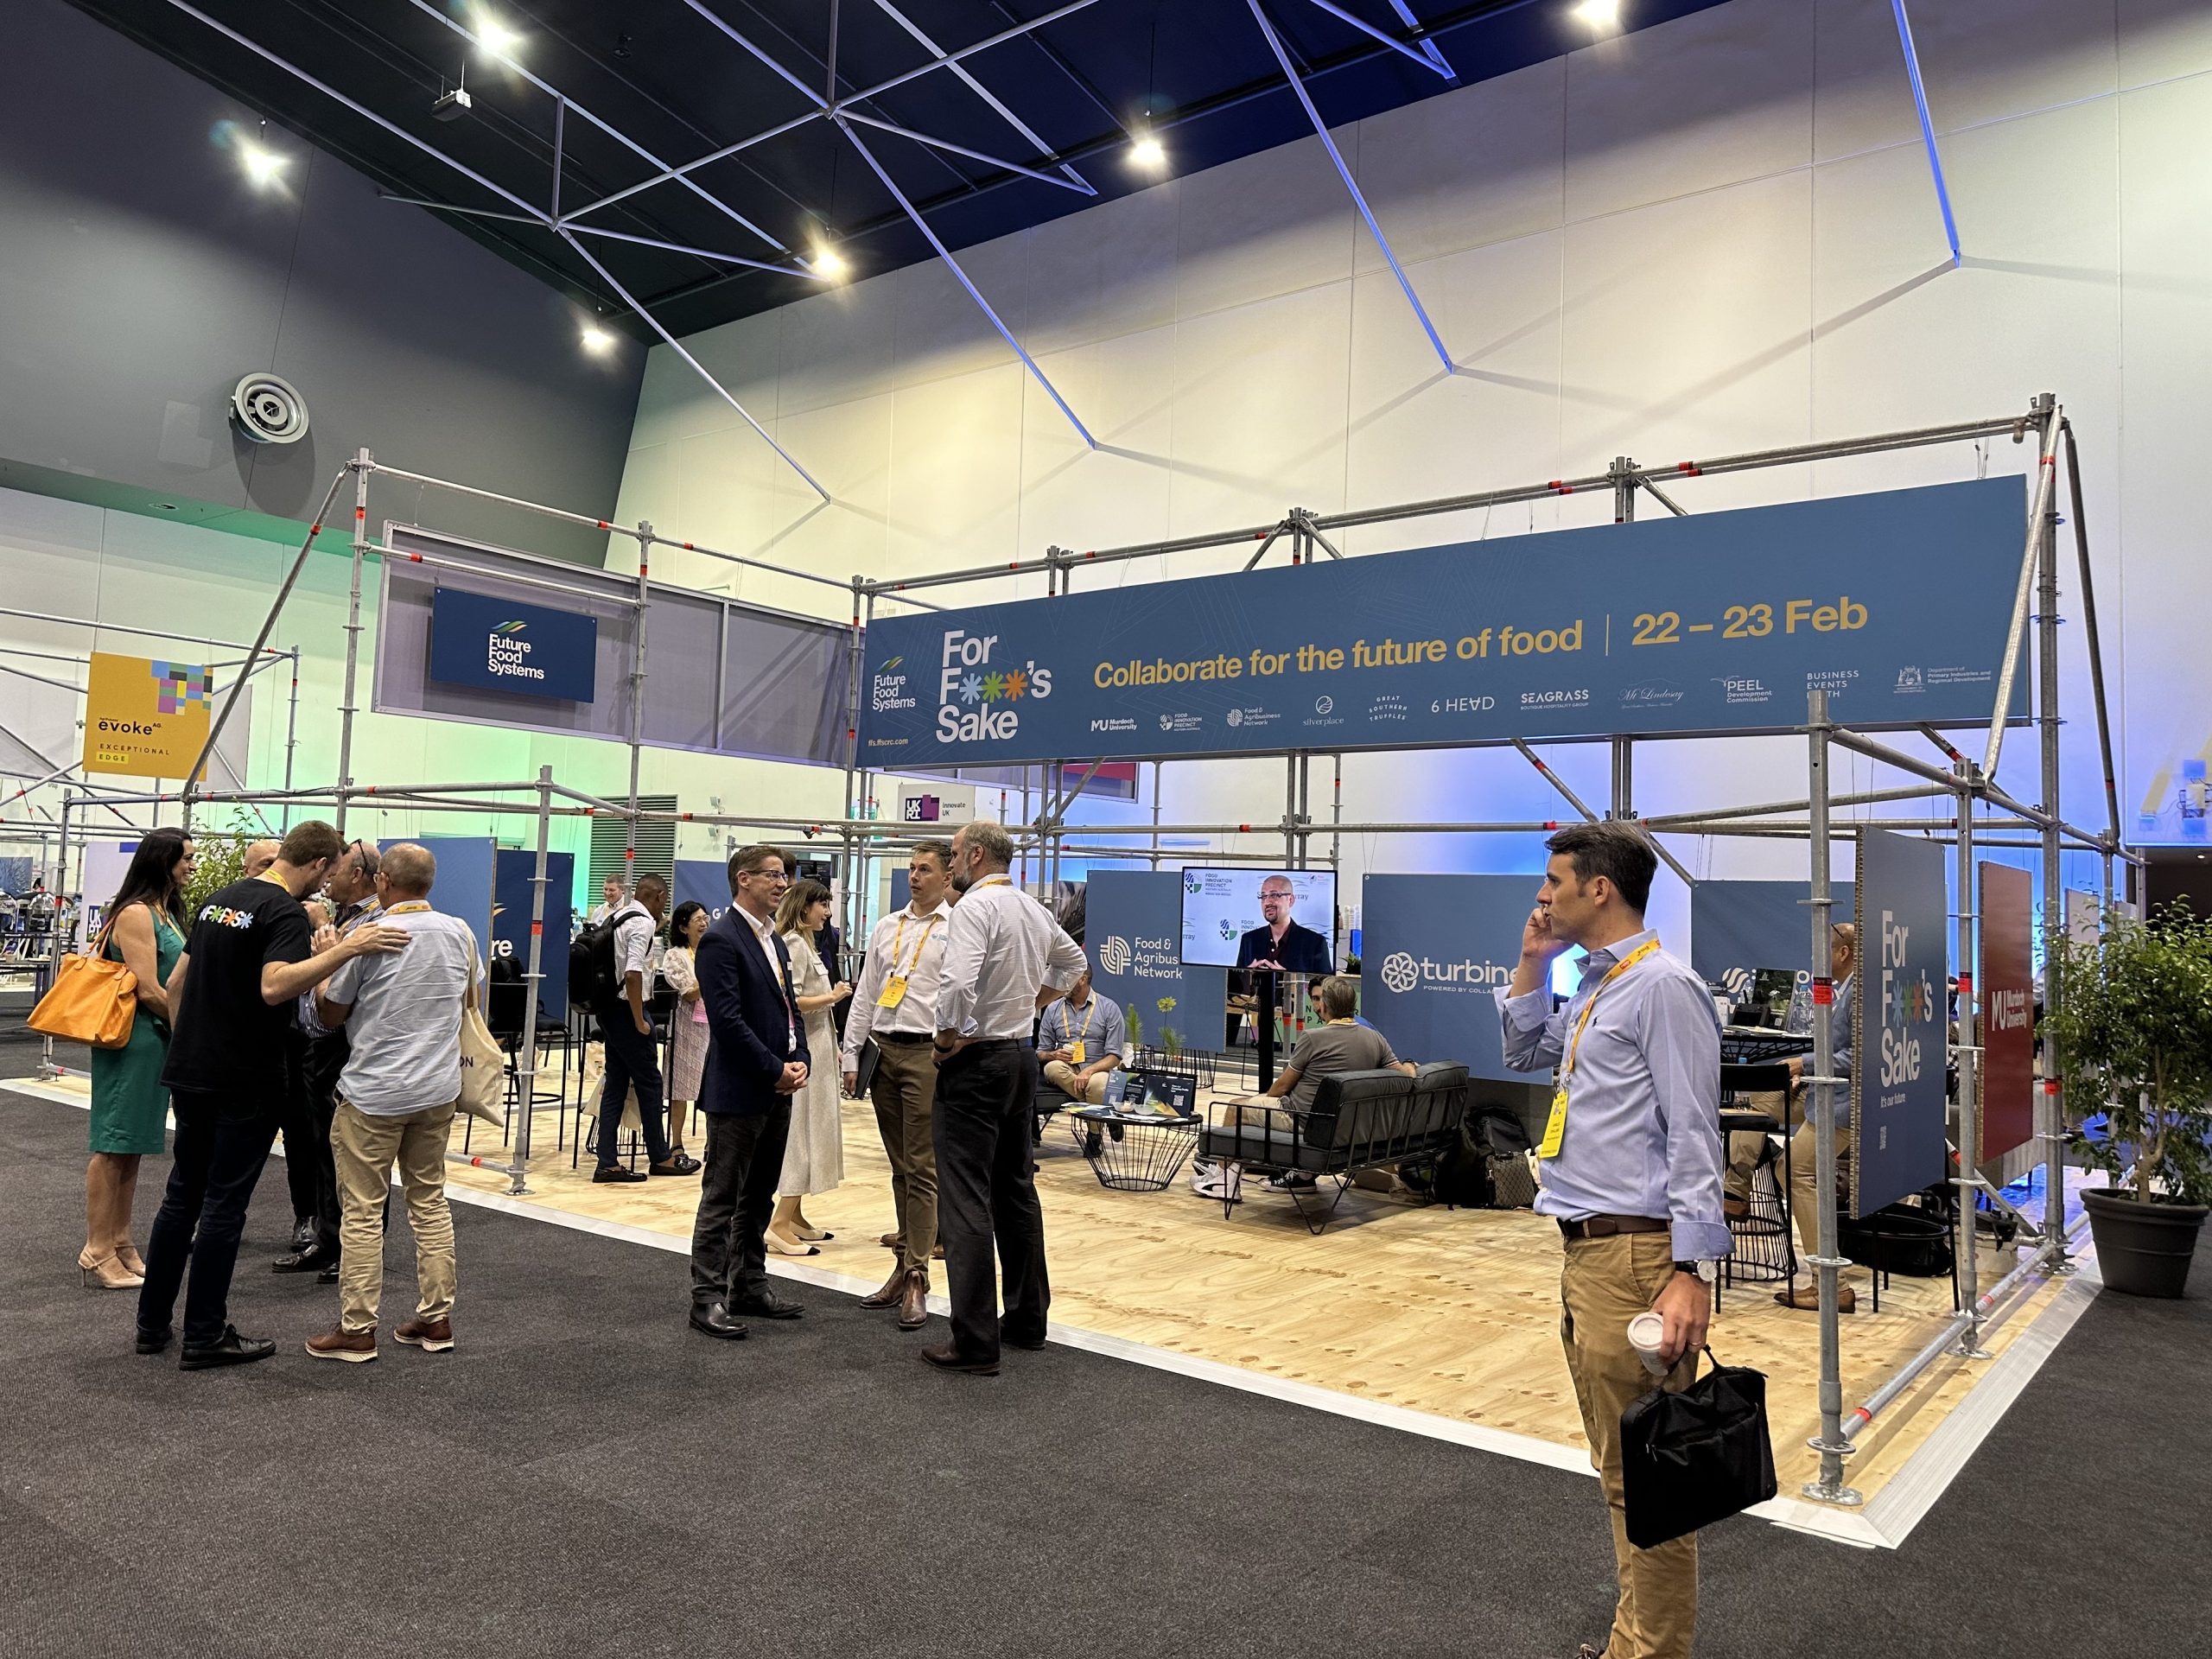 The exhibition floor was ‘connect central’ at evokeAG Perth, with Future Food System’s shared Hospitality Pavilion providing a natural meeting-point.